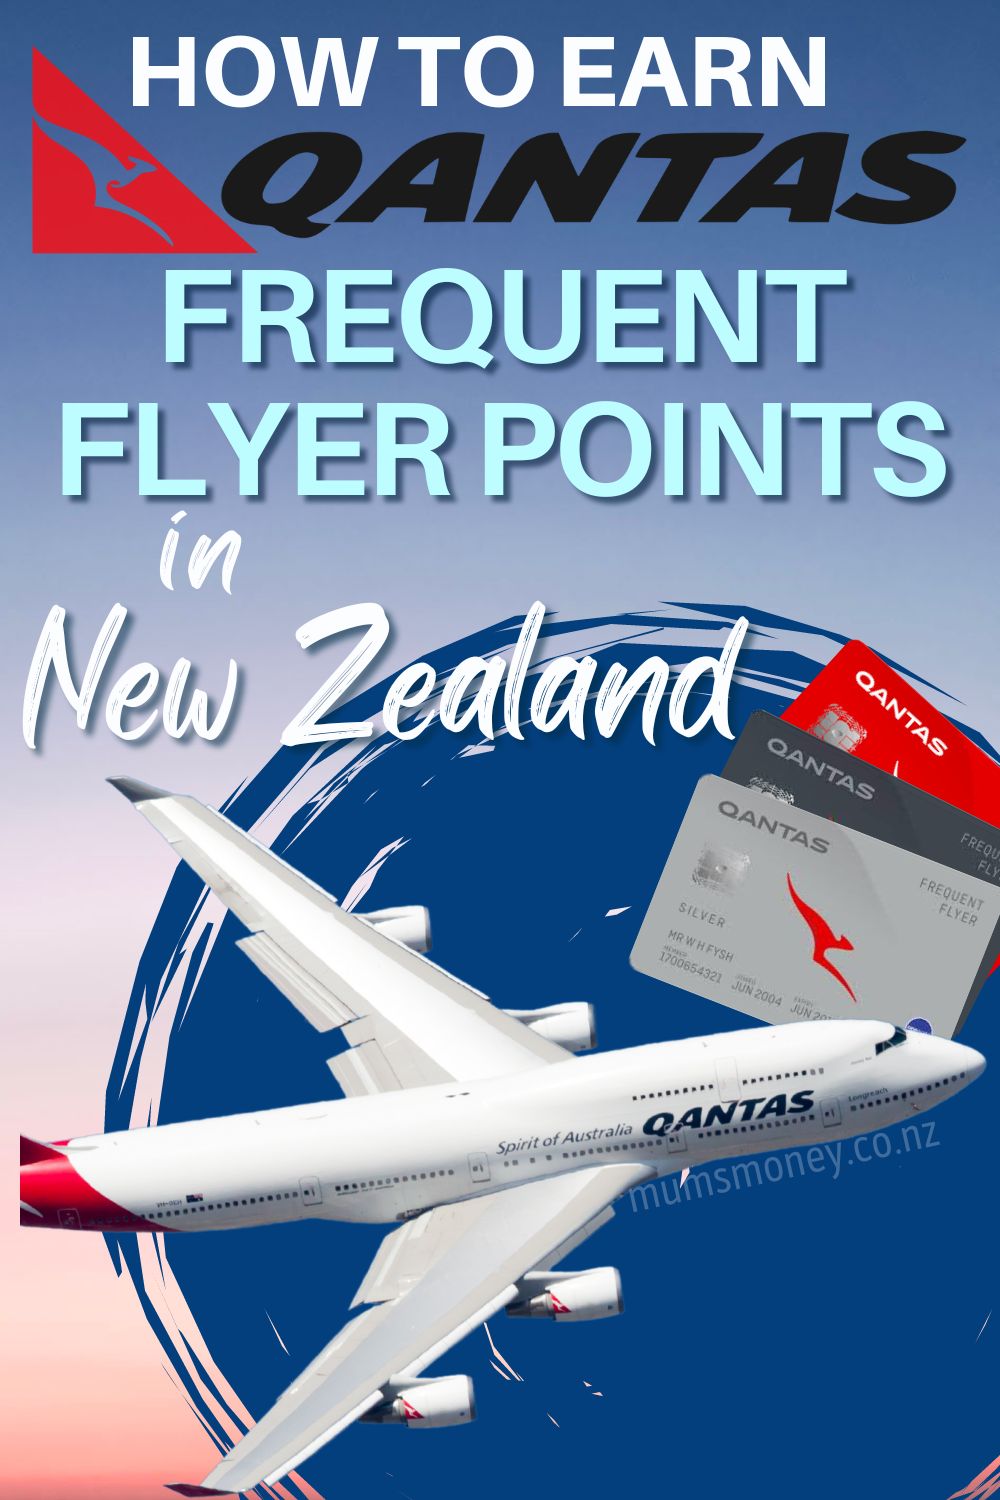 How to Earn Qantas Frequent Flyer Points in New Zealand Pin Image